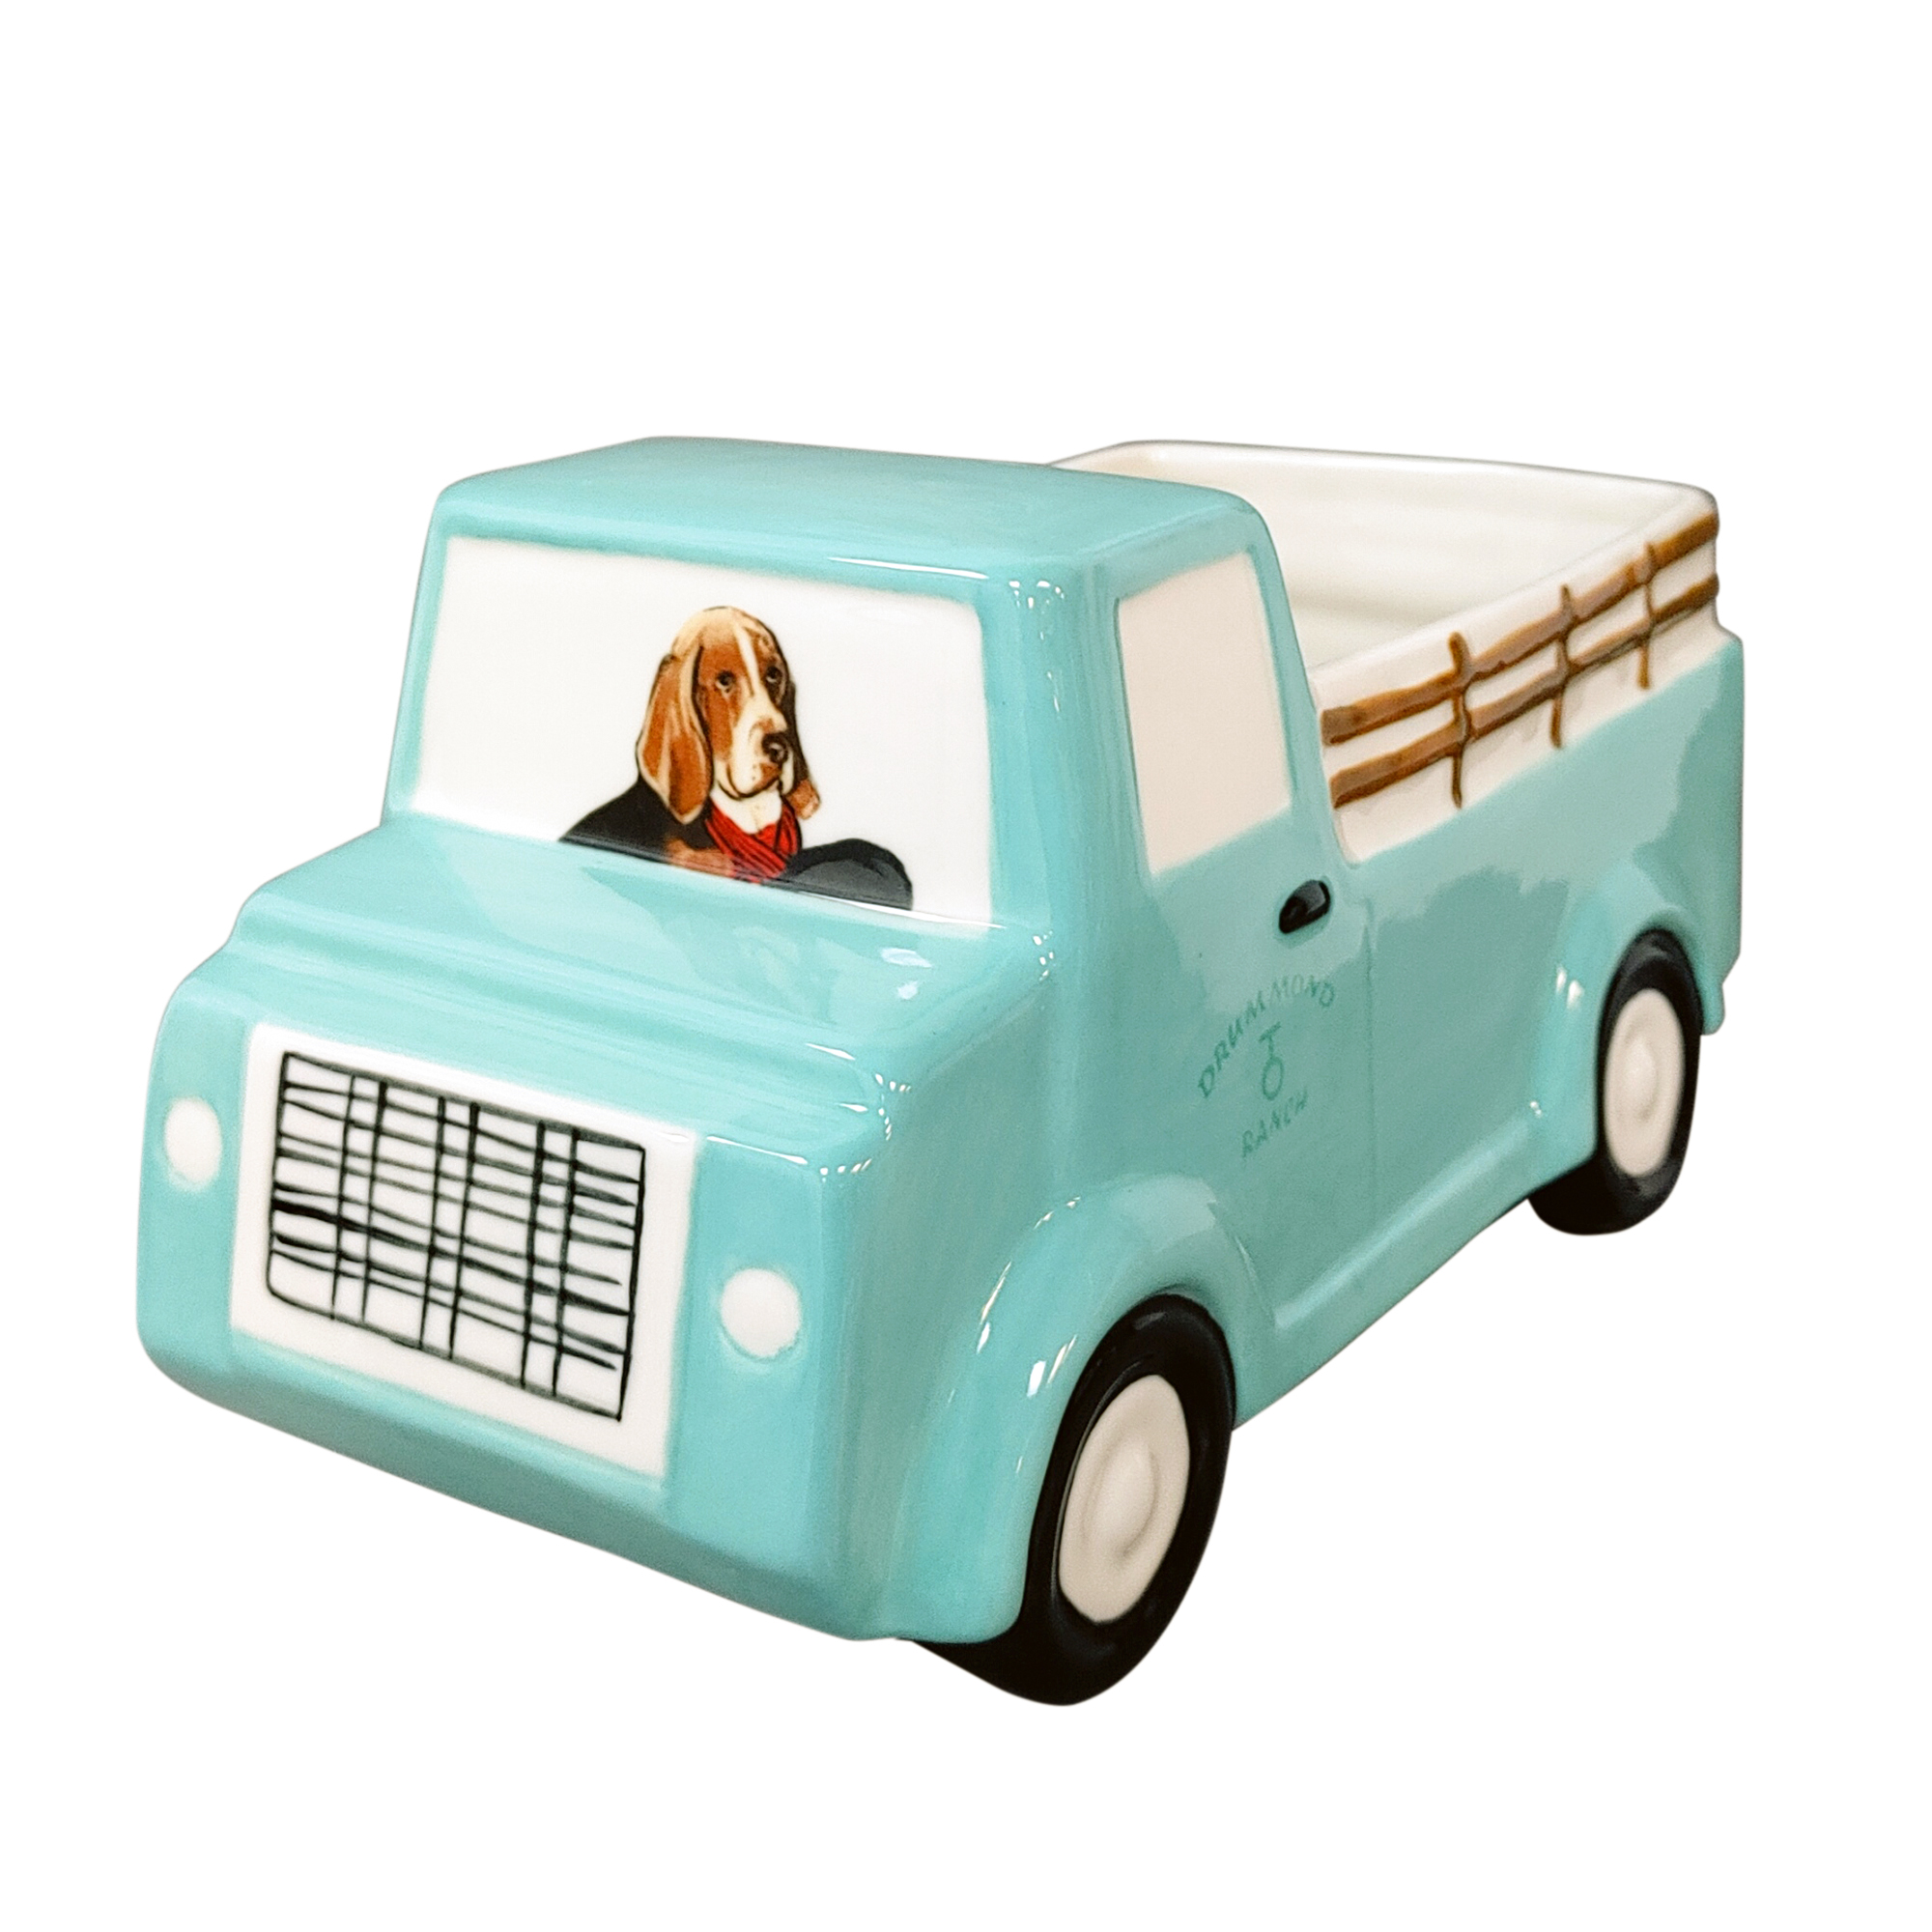 The Pioneer Woman Drummond Truck Novelty Planter 6 inch opening, Stoneware - image 1 of 5